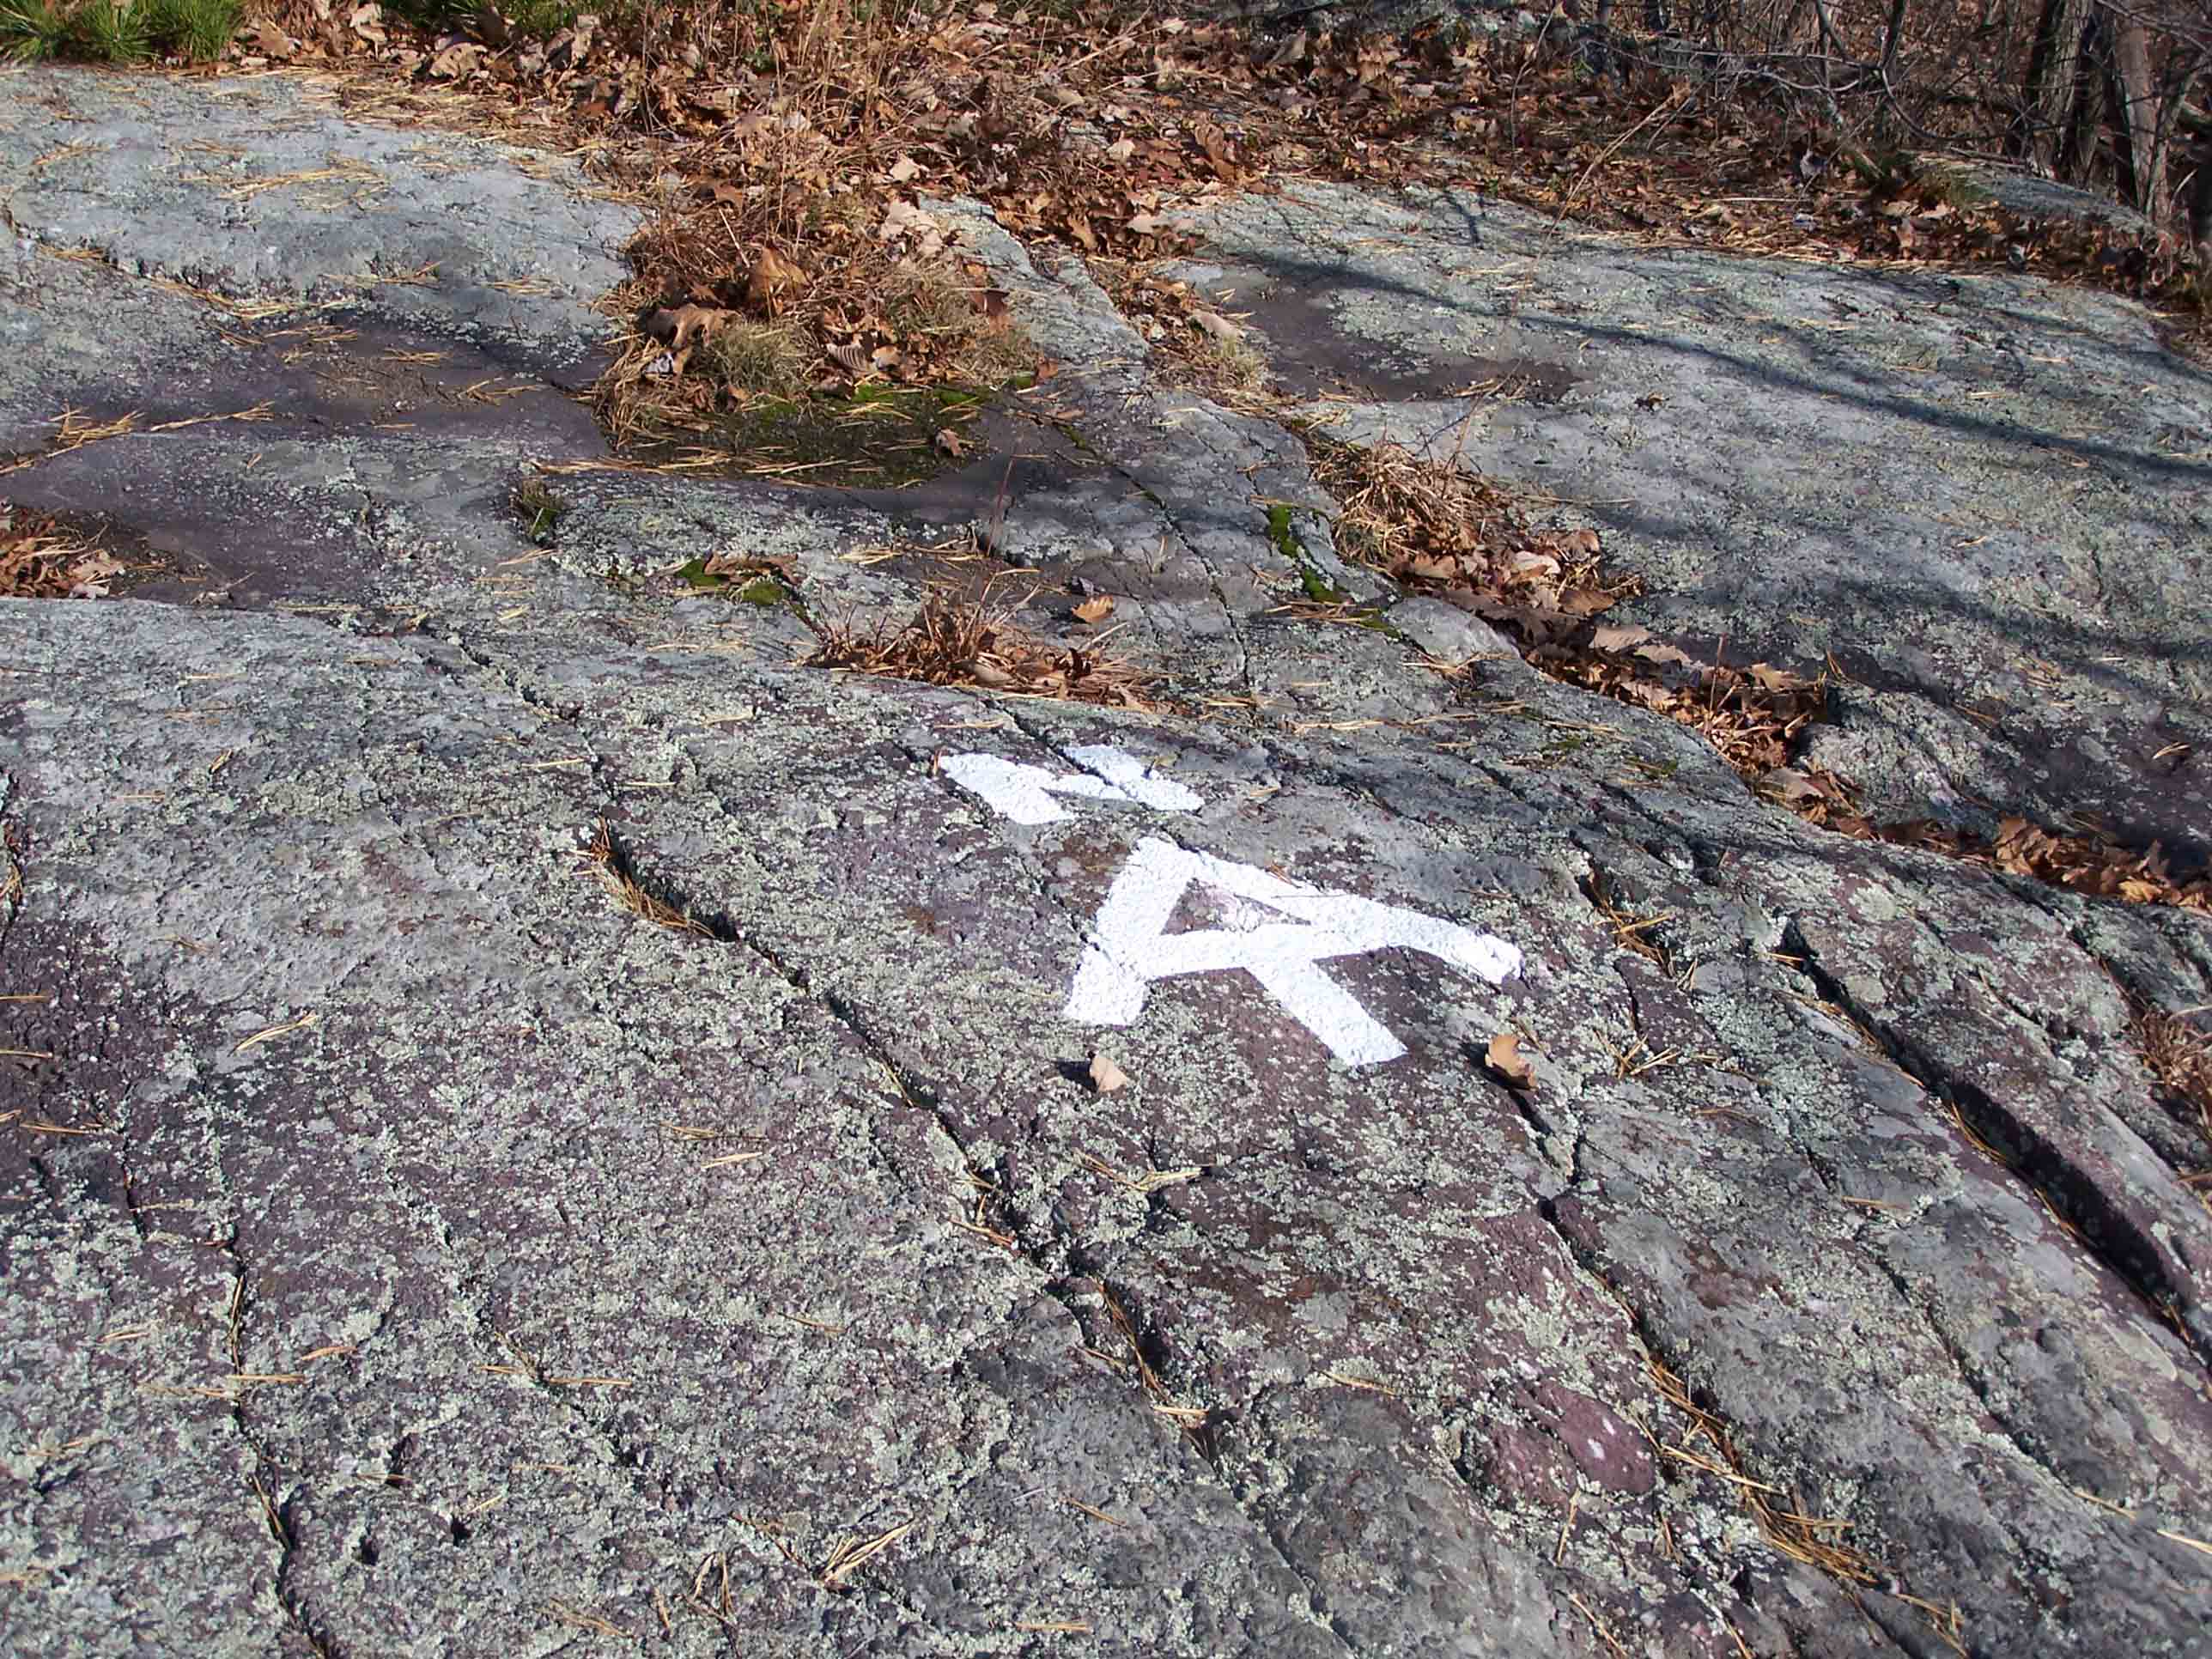 mm 0.0 - Direction sign on rocks. Courtesy at@rohland.org